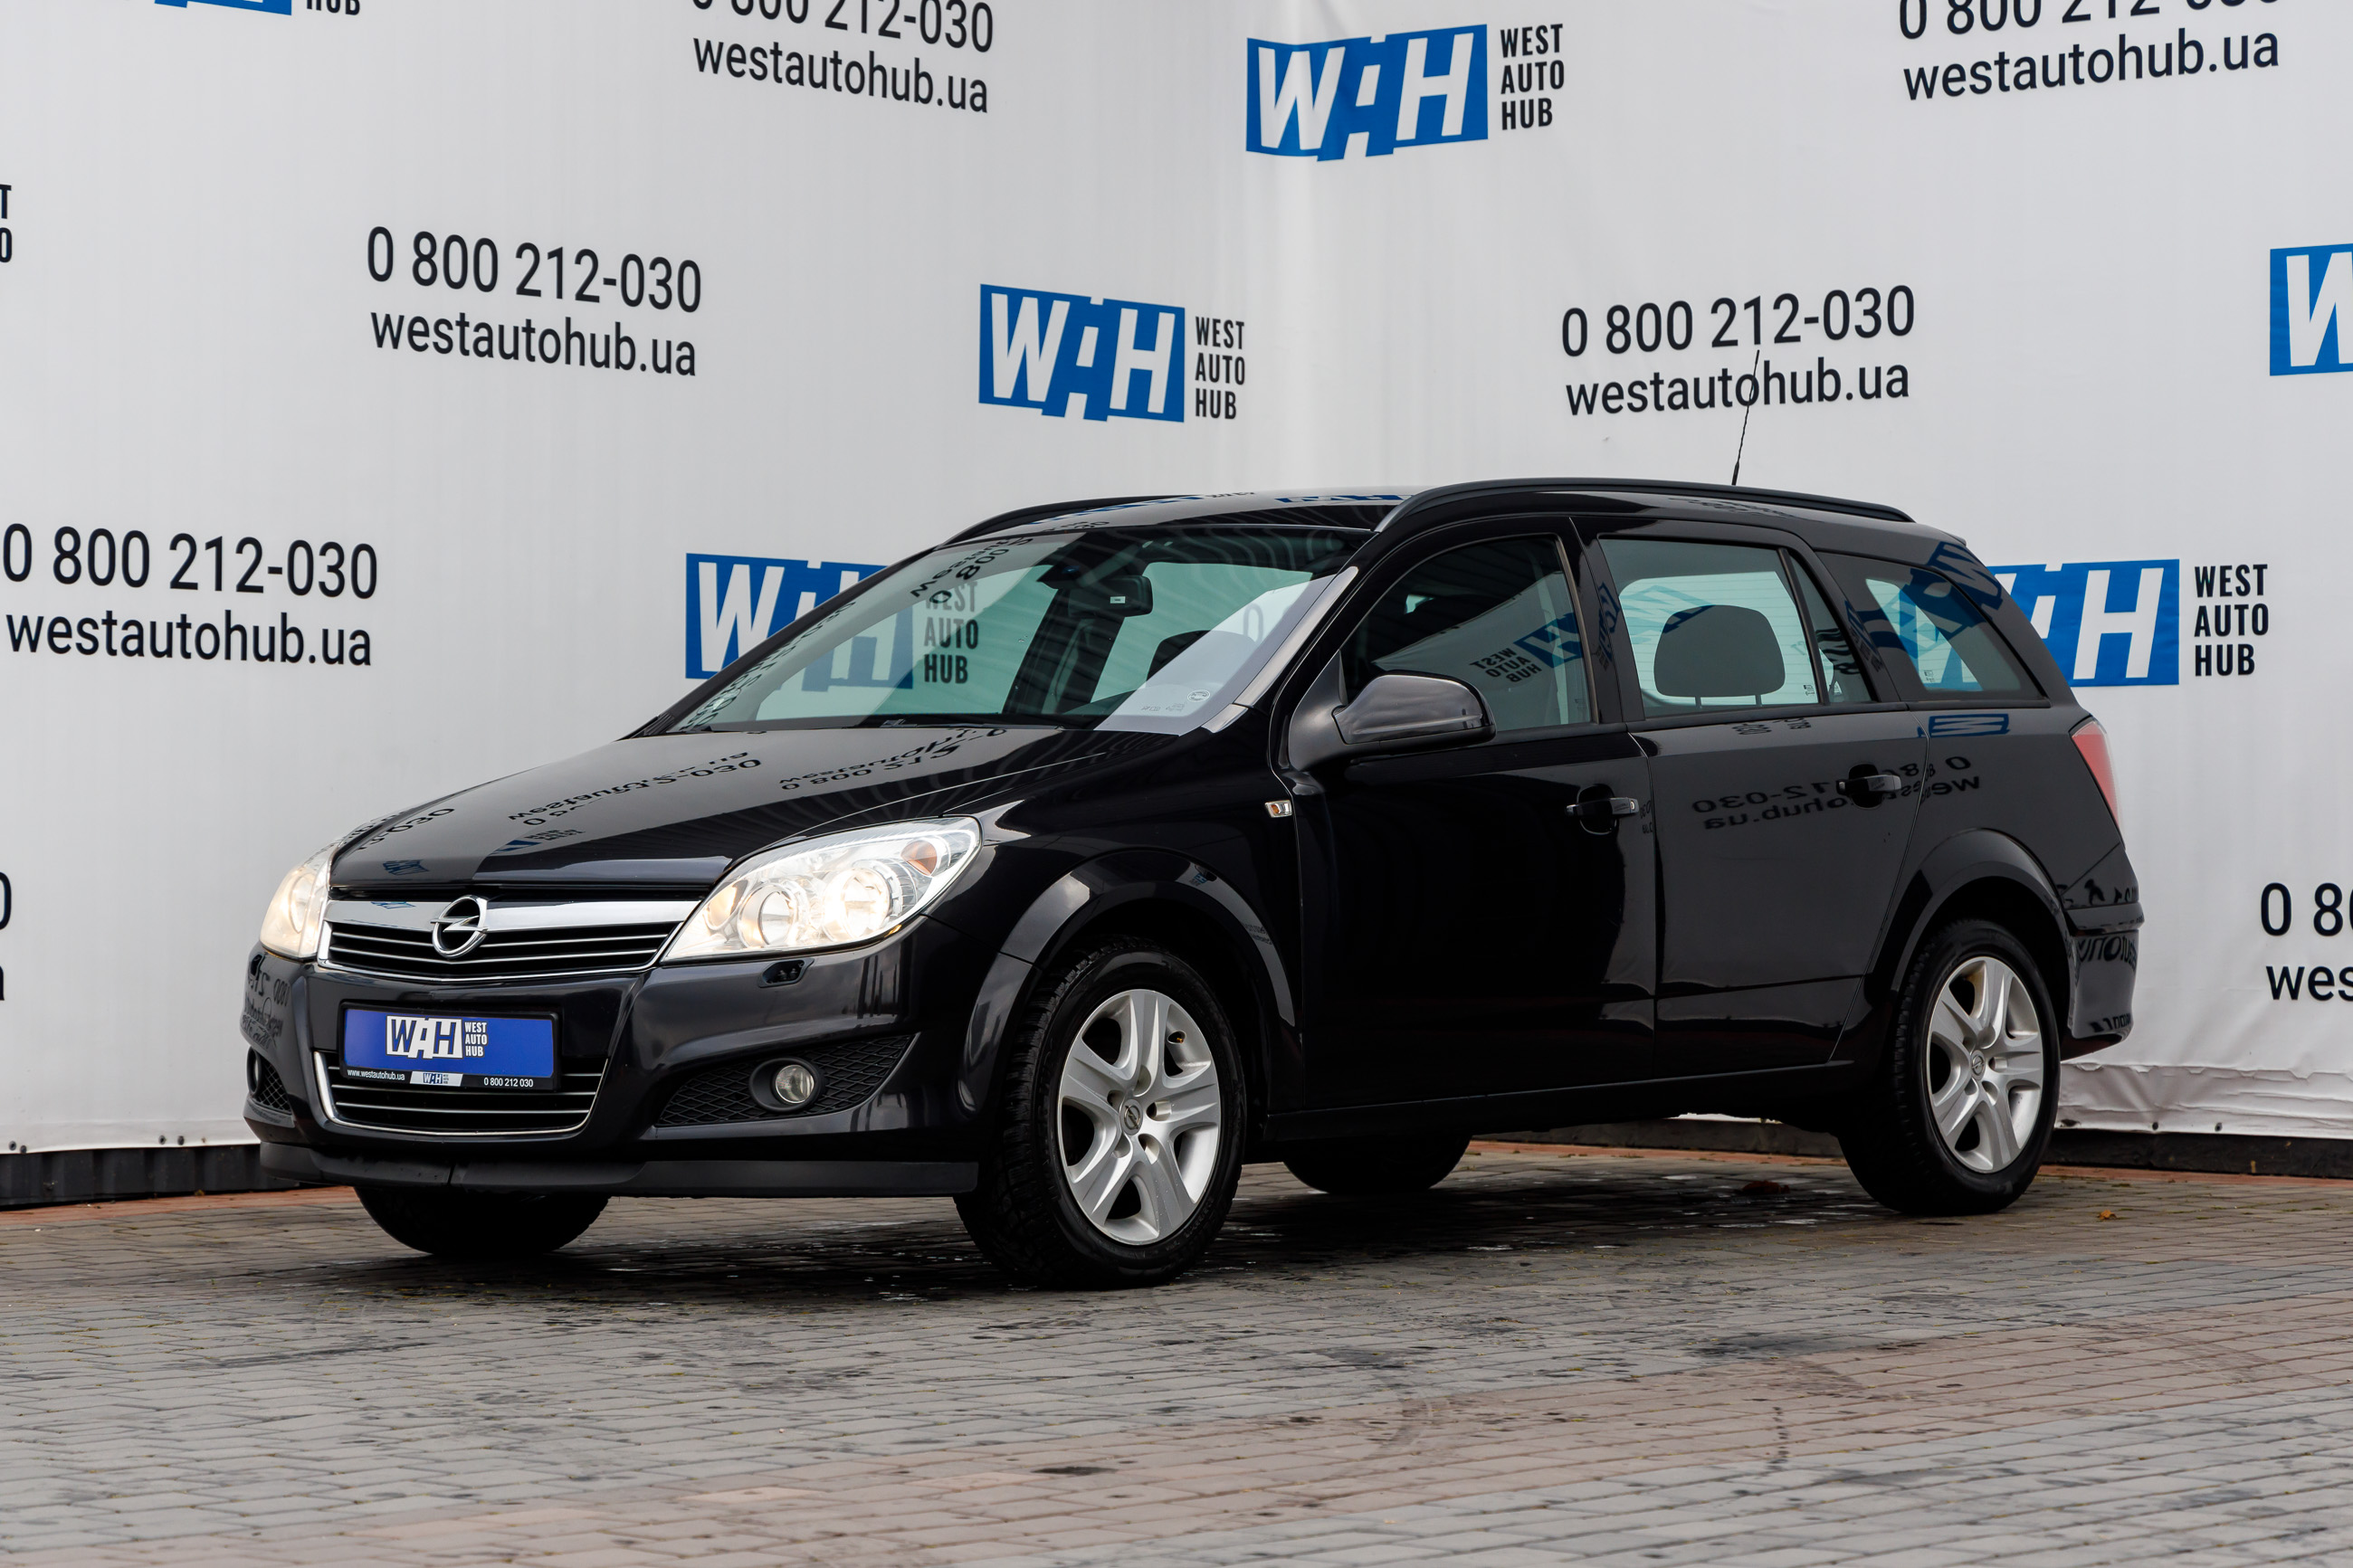 Opel Astra H 2010 - buy a car from Europe